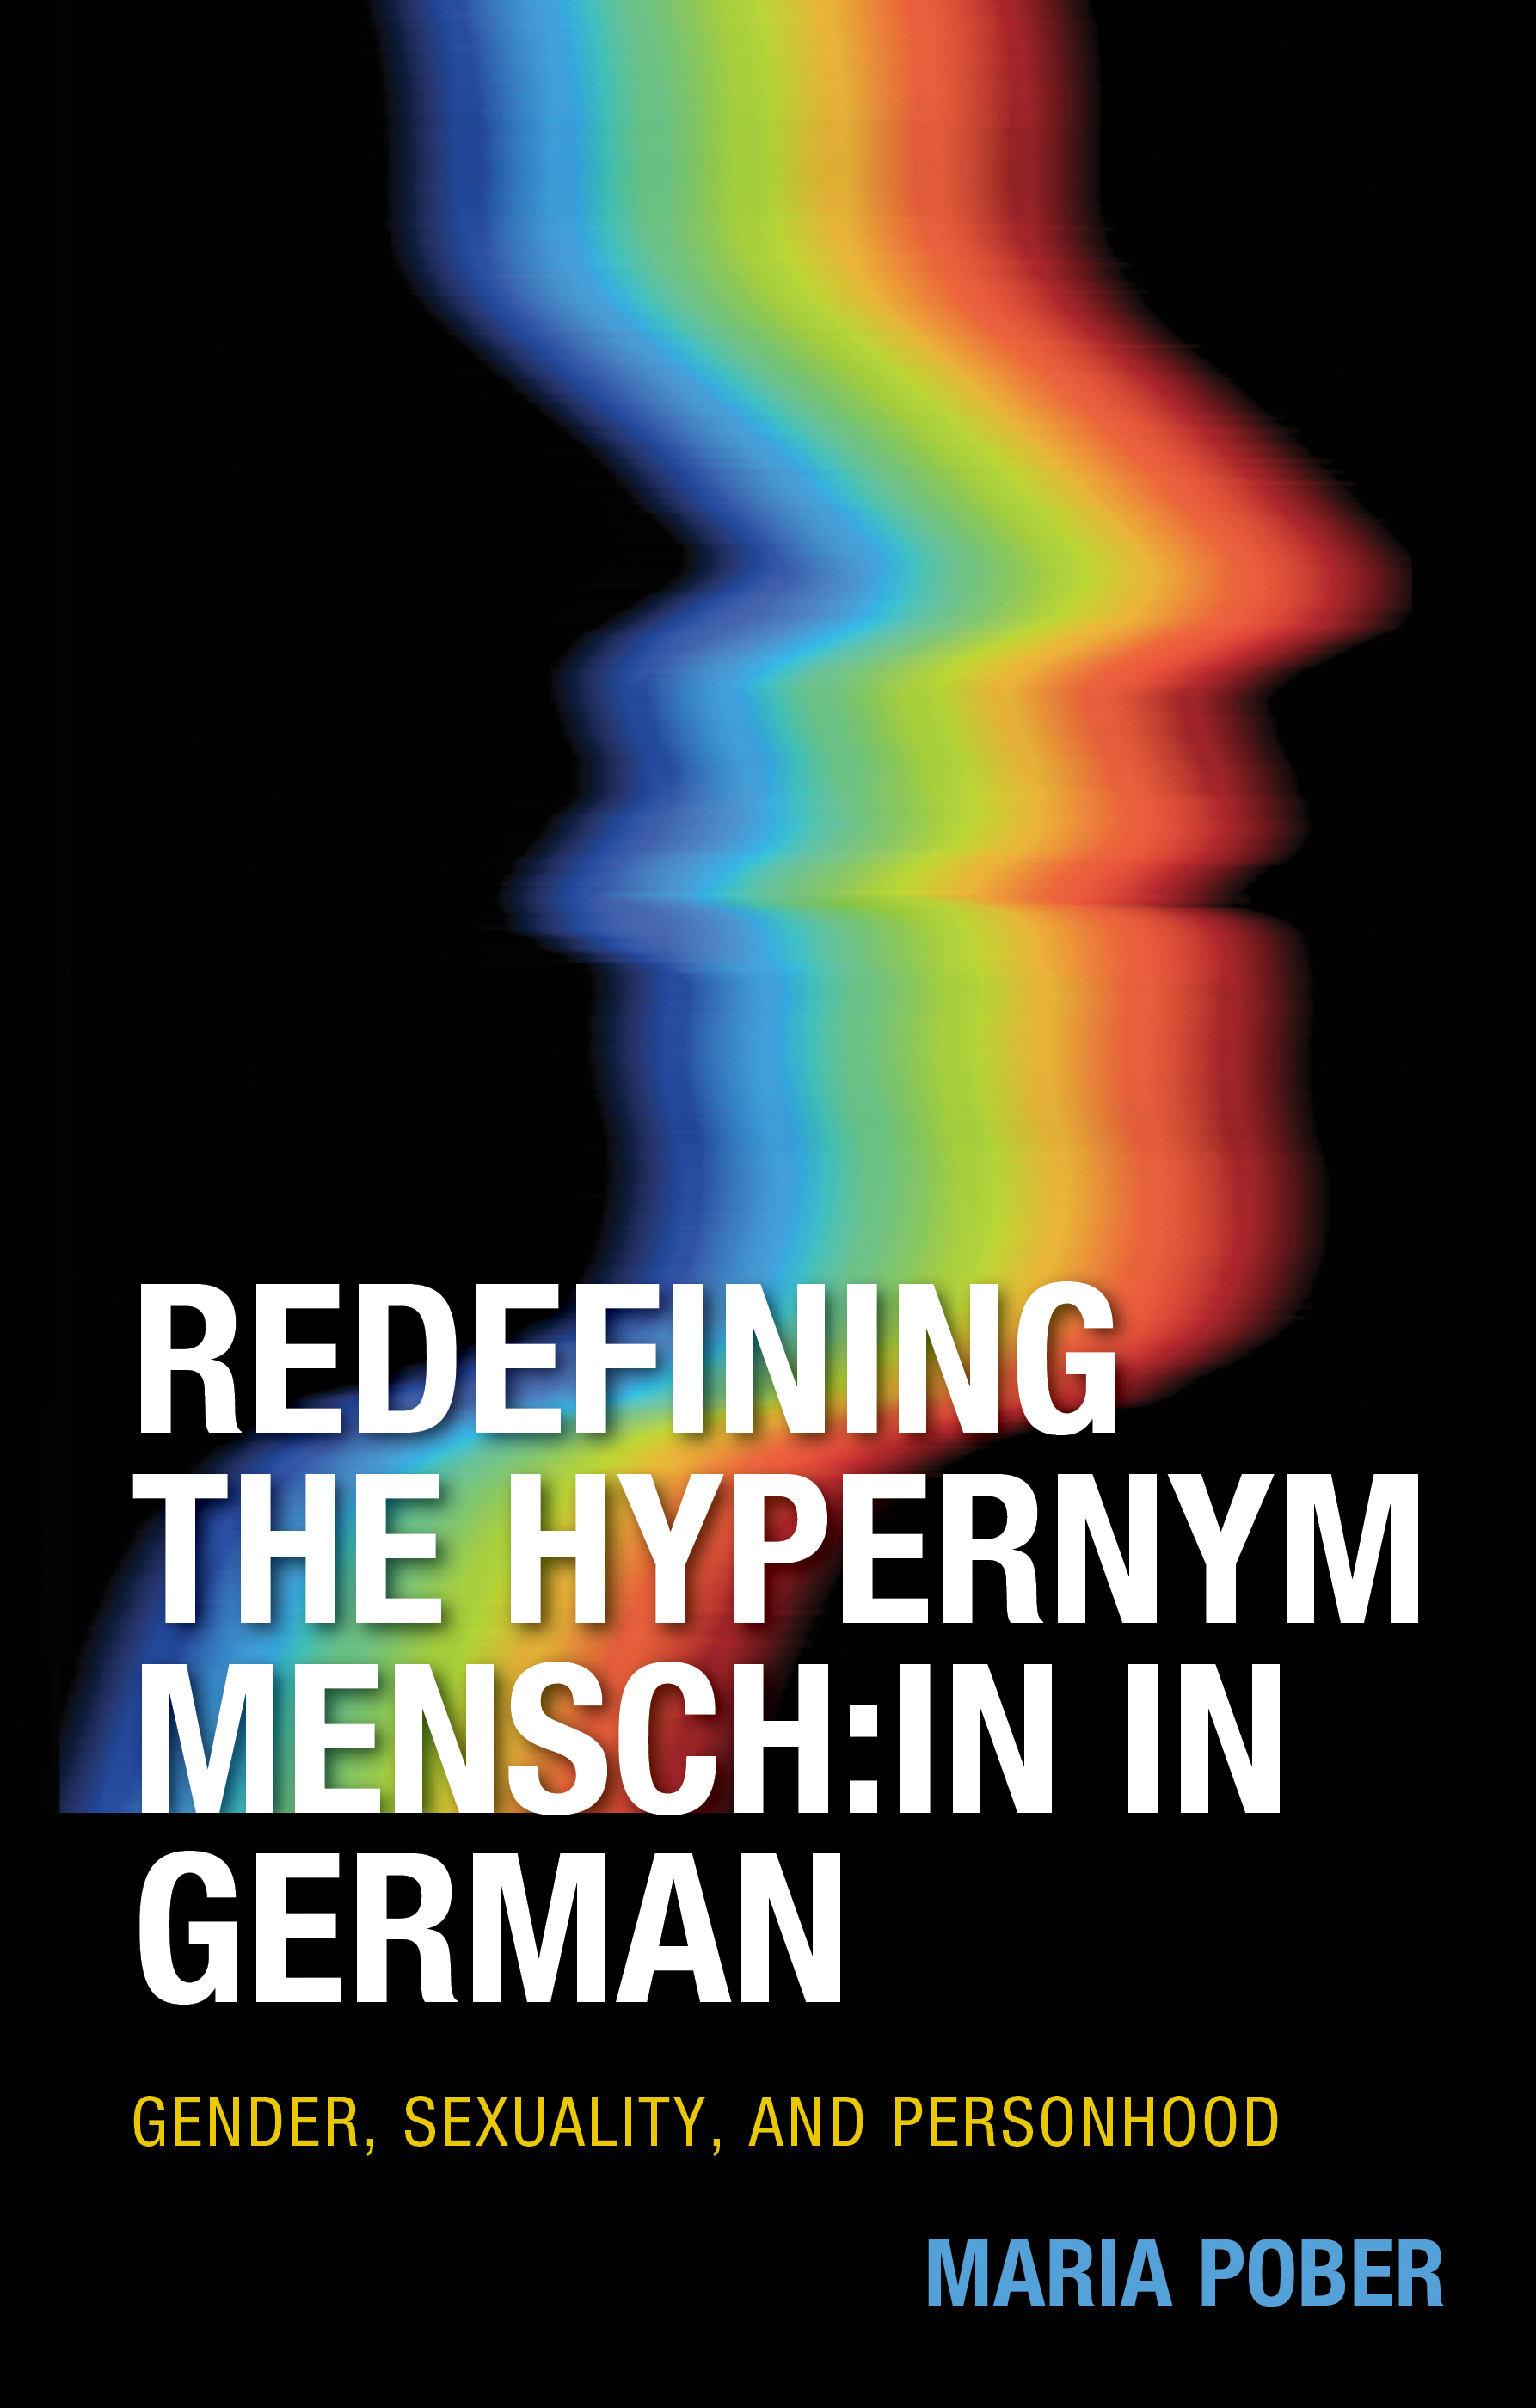 Redefining the Hypernym Mensch:in in German: Gender, Sexuality, and Personhood